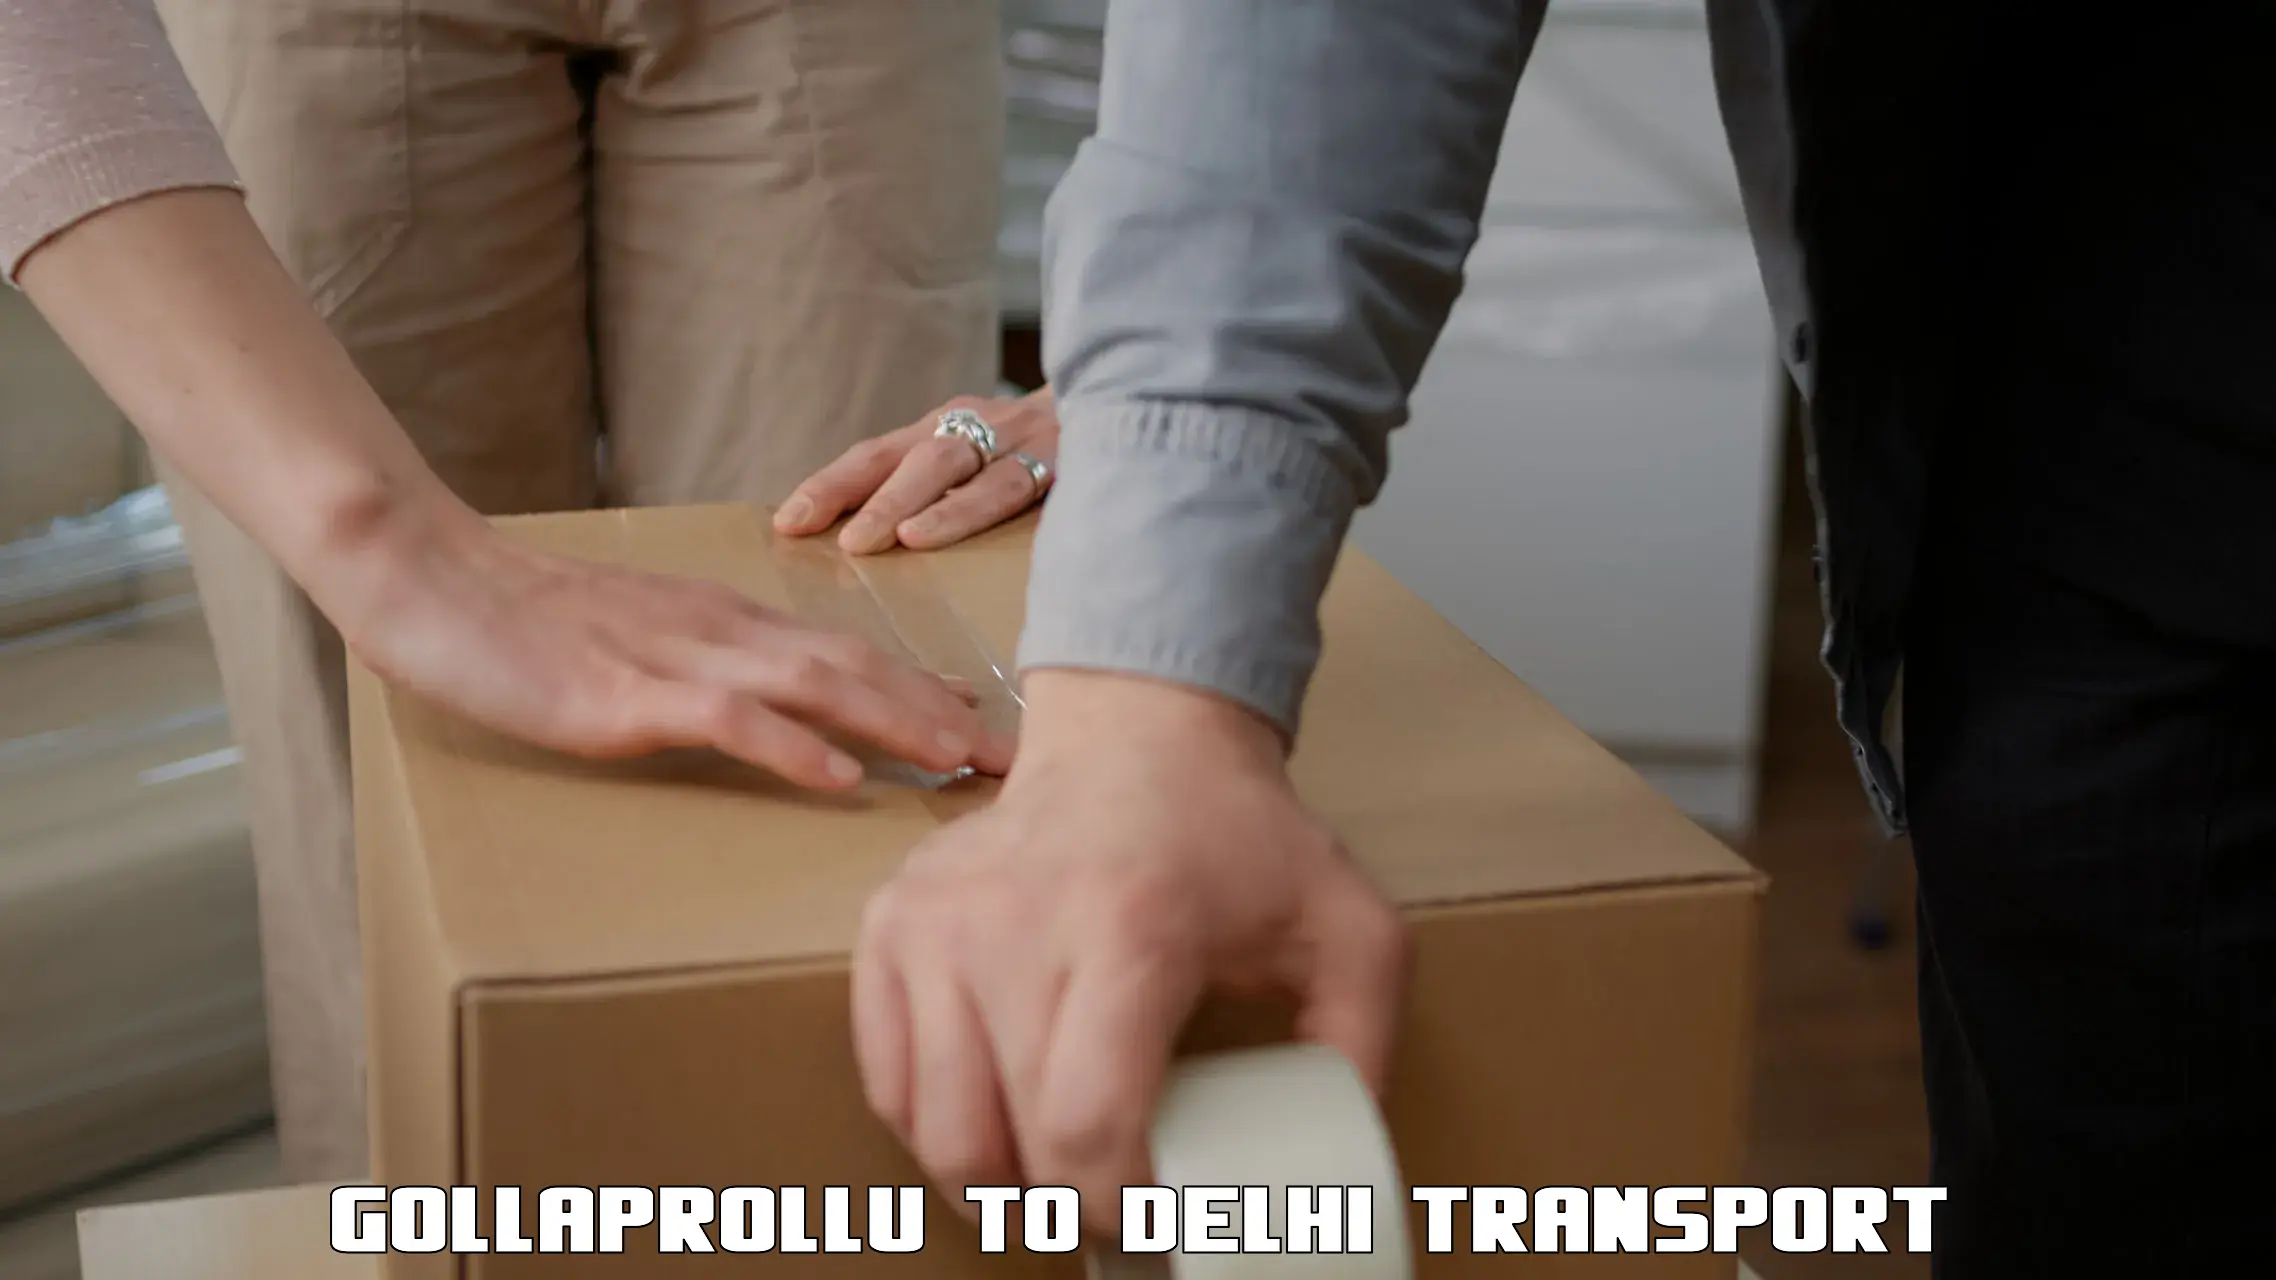 Road transport online services Gollaprollu to Indraprastha